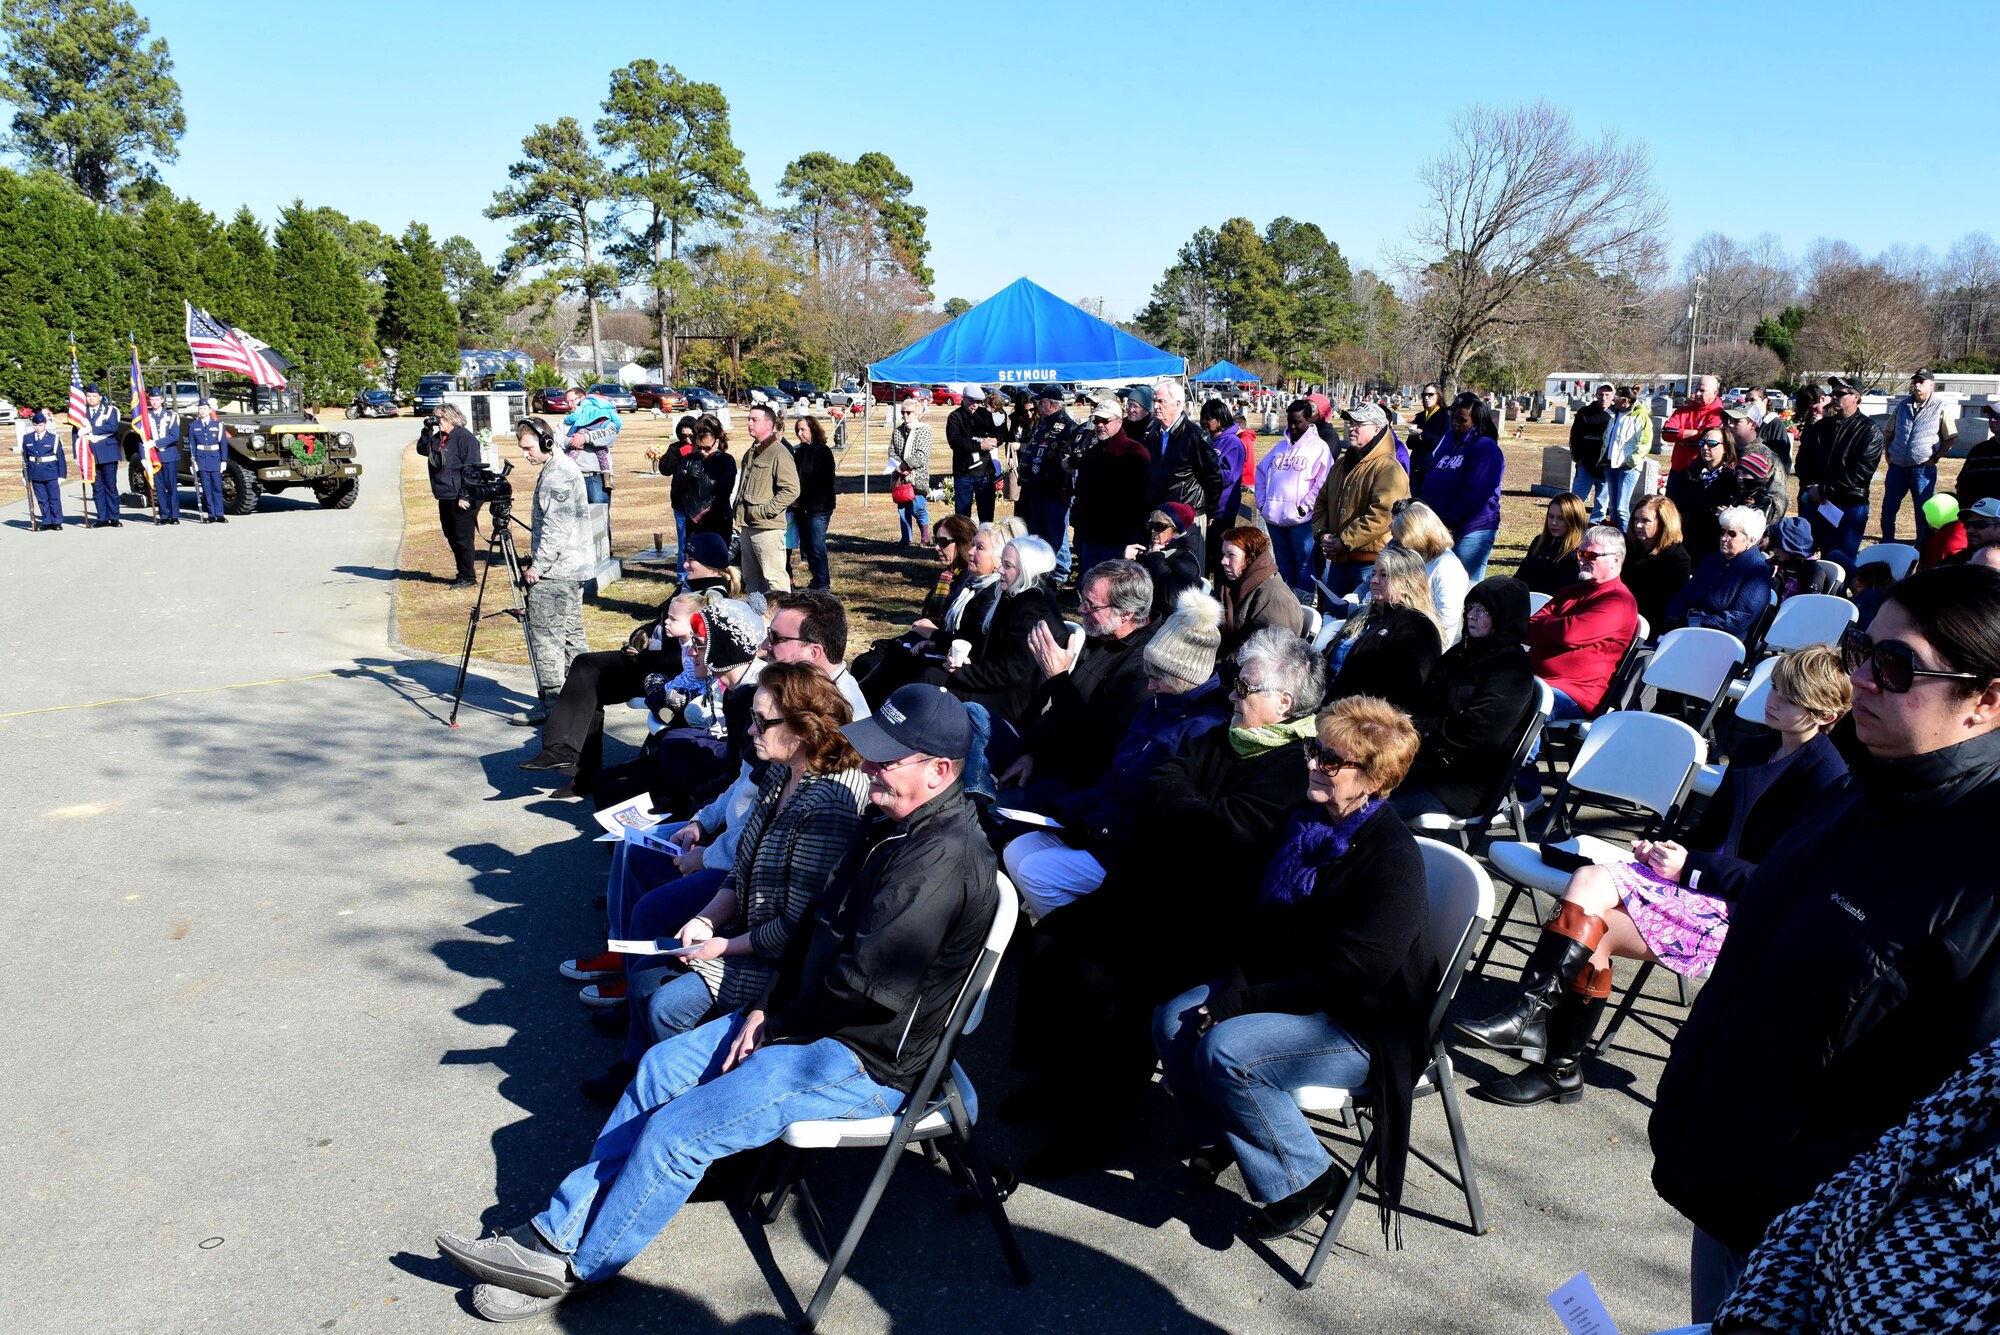 Members of the community attend the Wayne County Wreaths Across America ceremony honor fallen service members Dec. 16, 2017, at Evergreen Memorial Cemetery in Princeton, North Carolina.